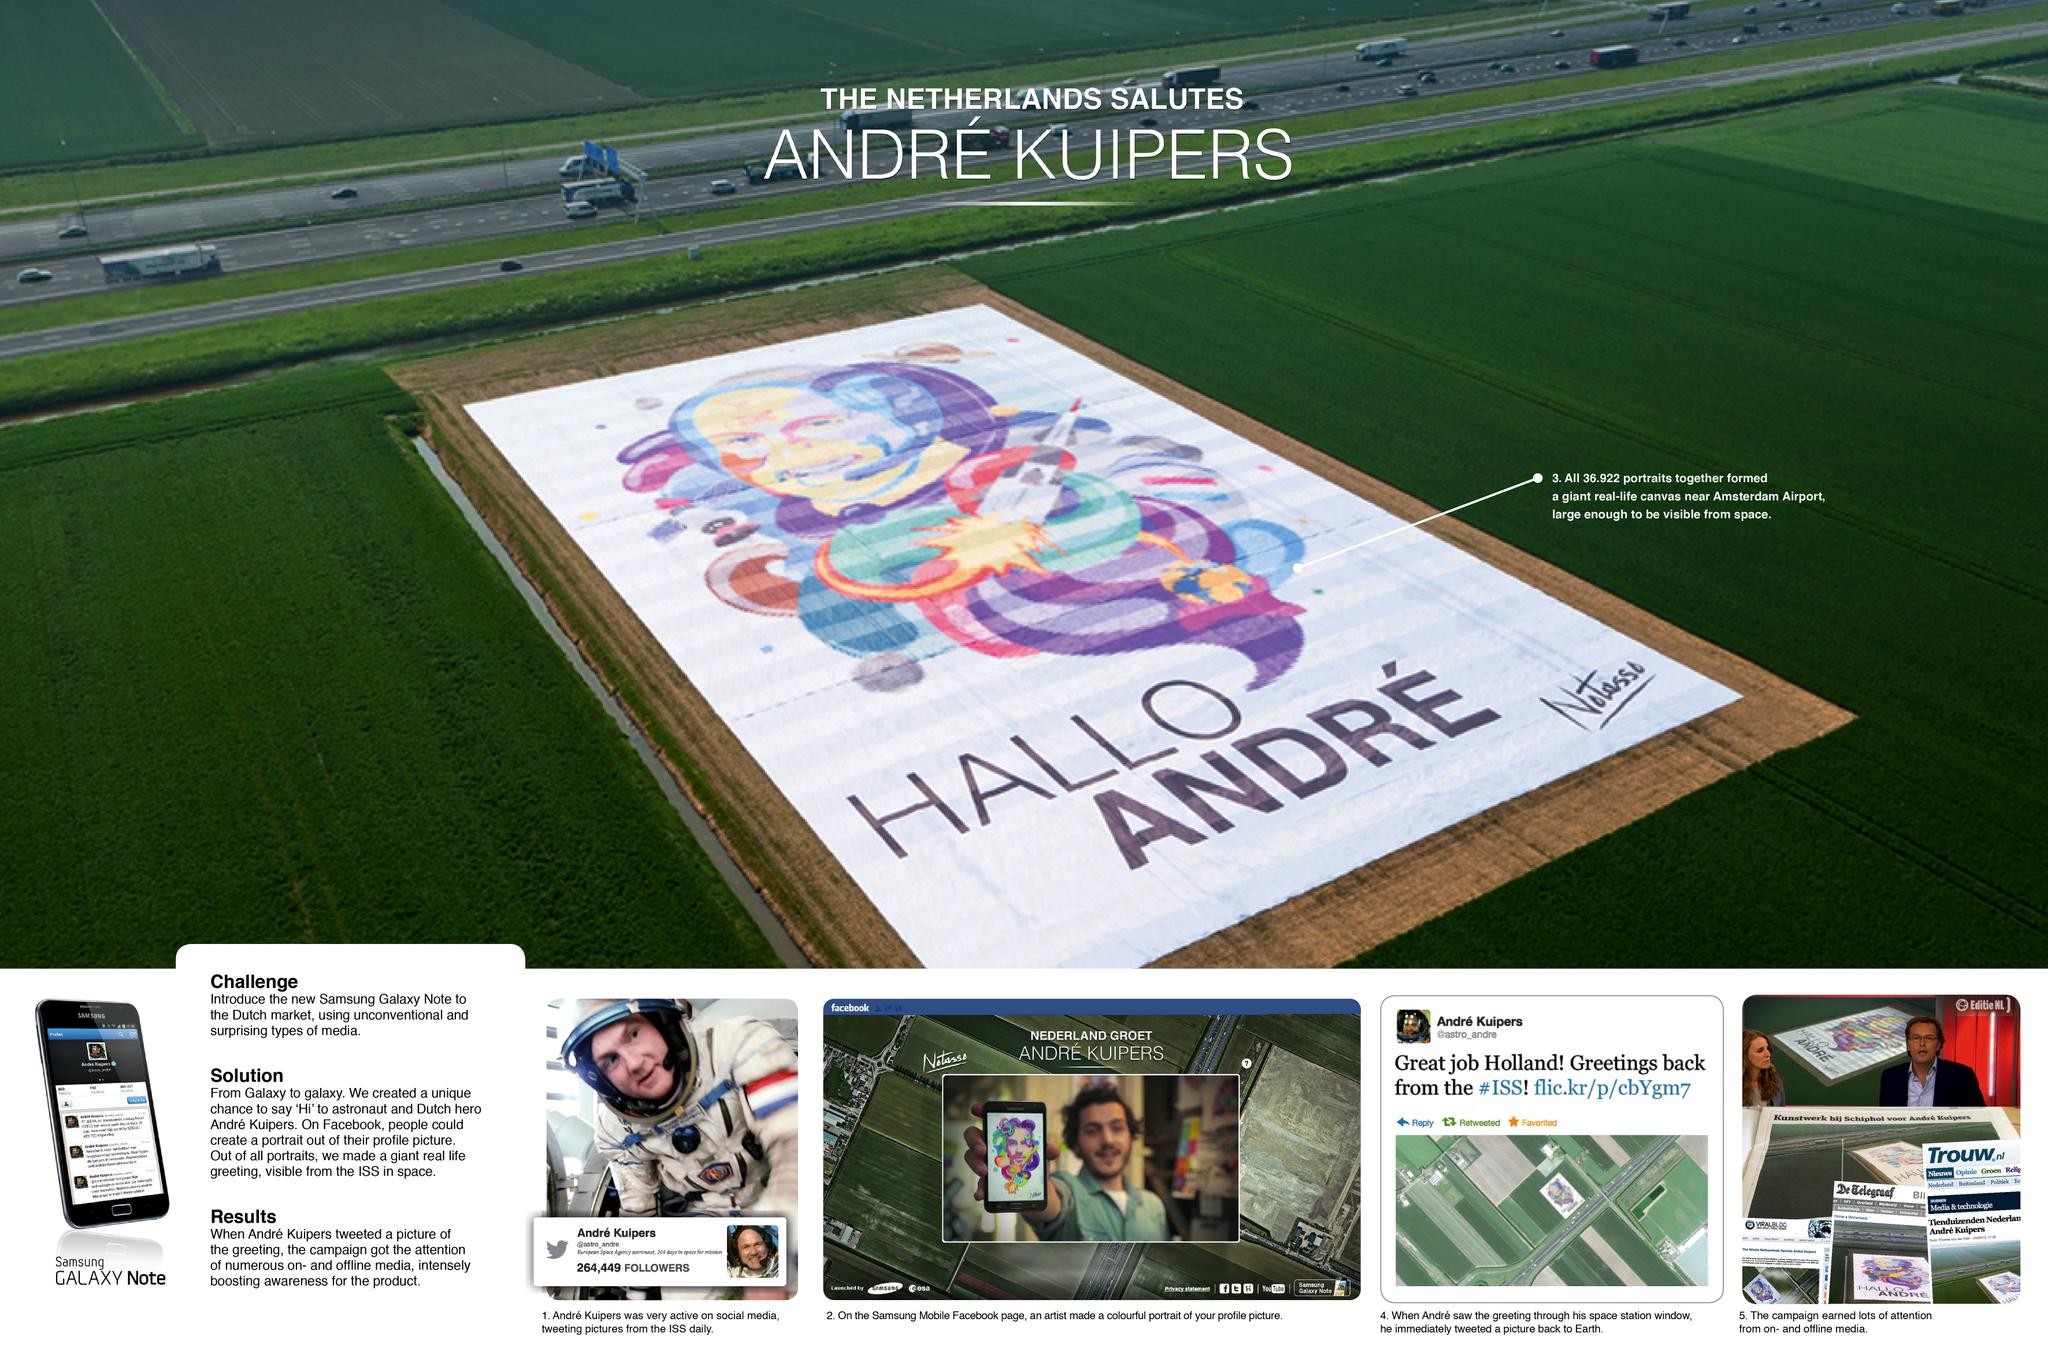 THE NETHERLANDS SALUTES ANDRÉ KUIPERS